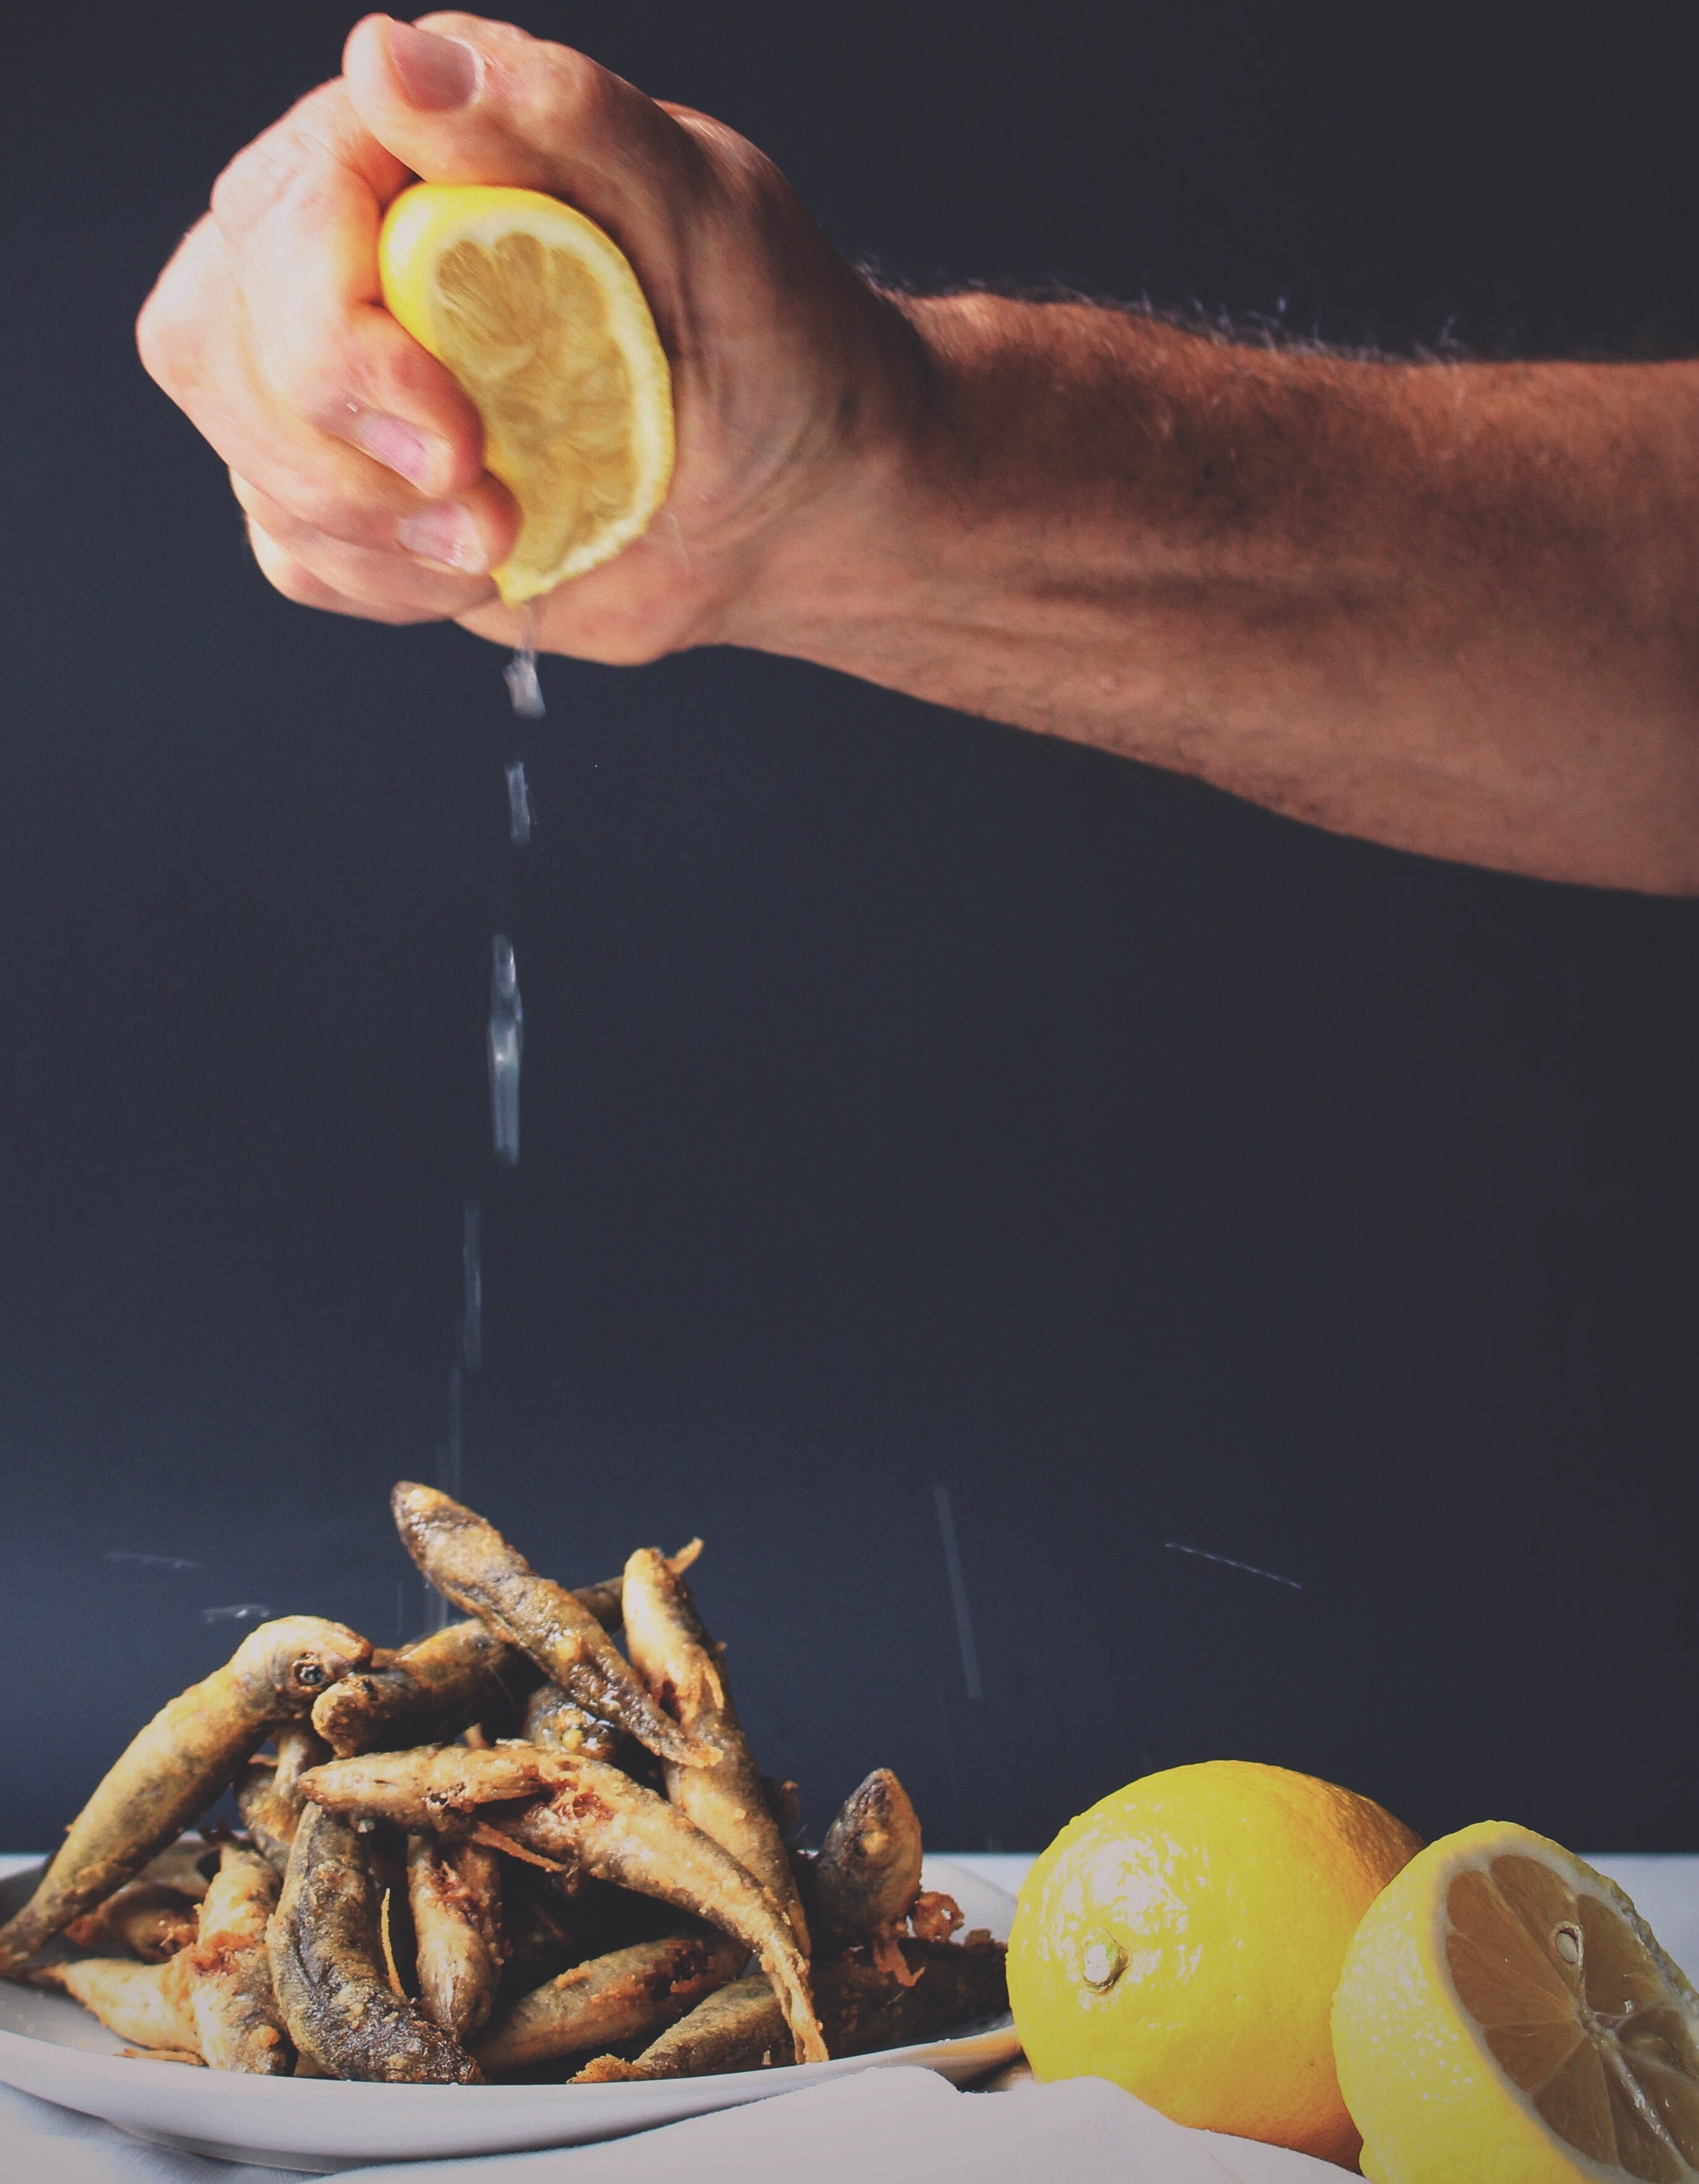 person squeezing lemon on fried fishes, food, human Hand, freshness